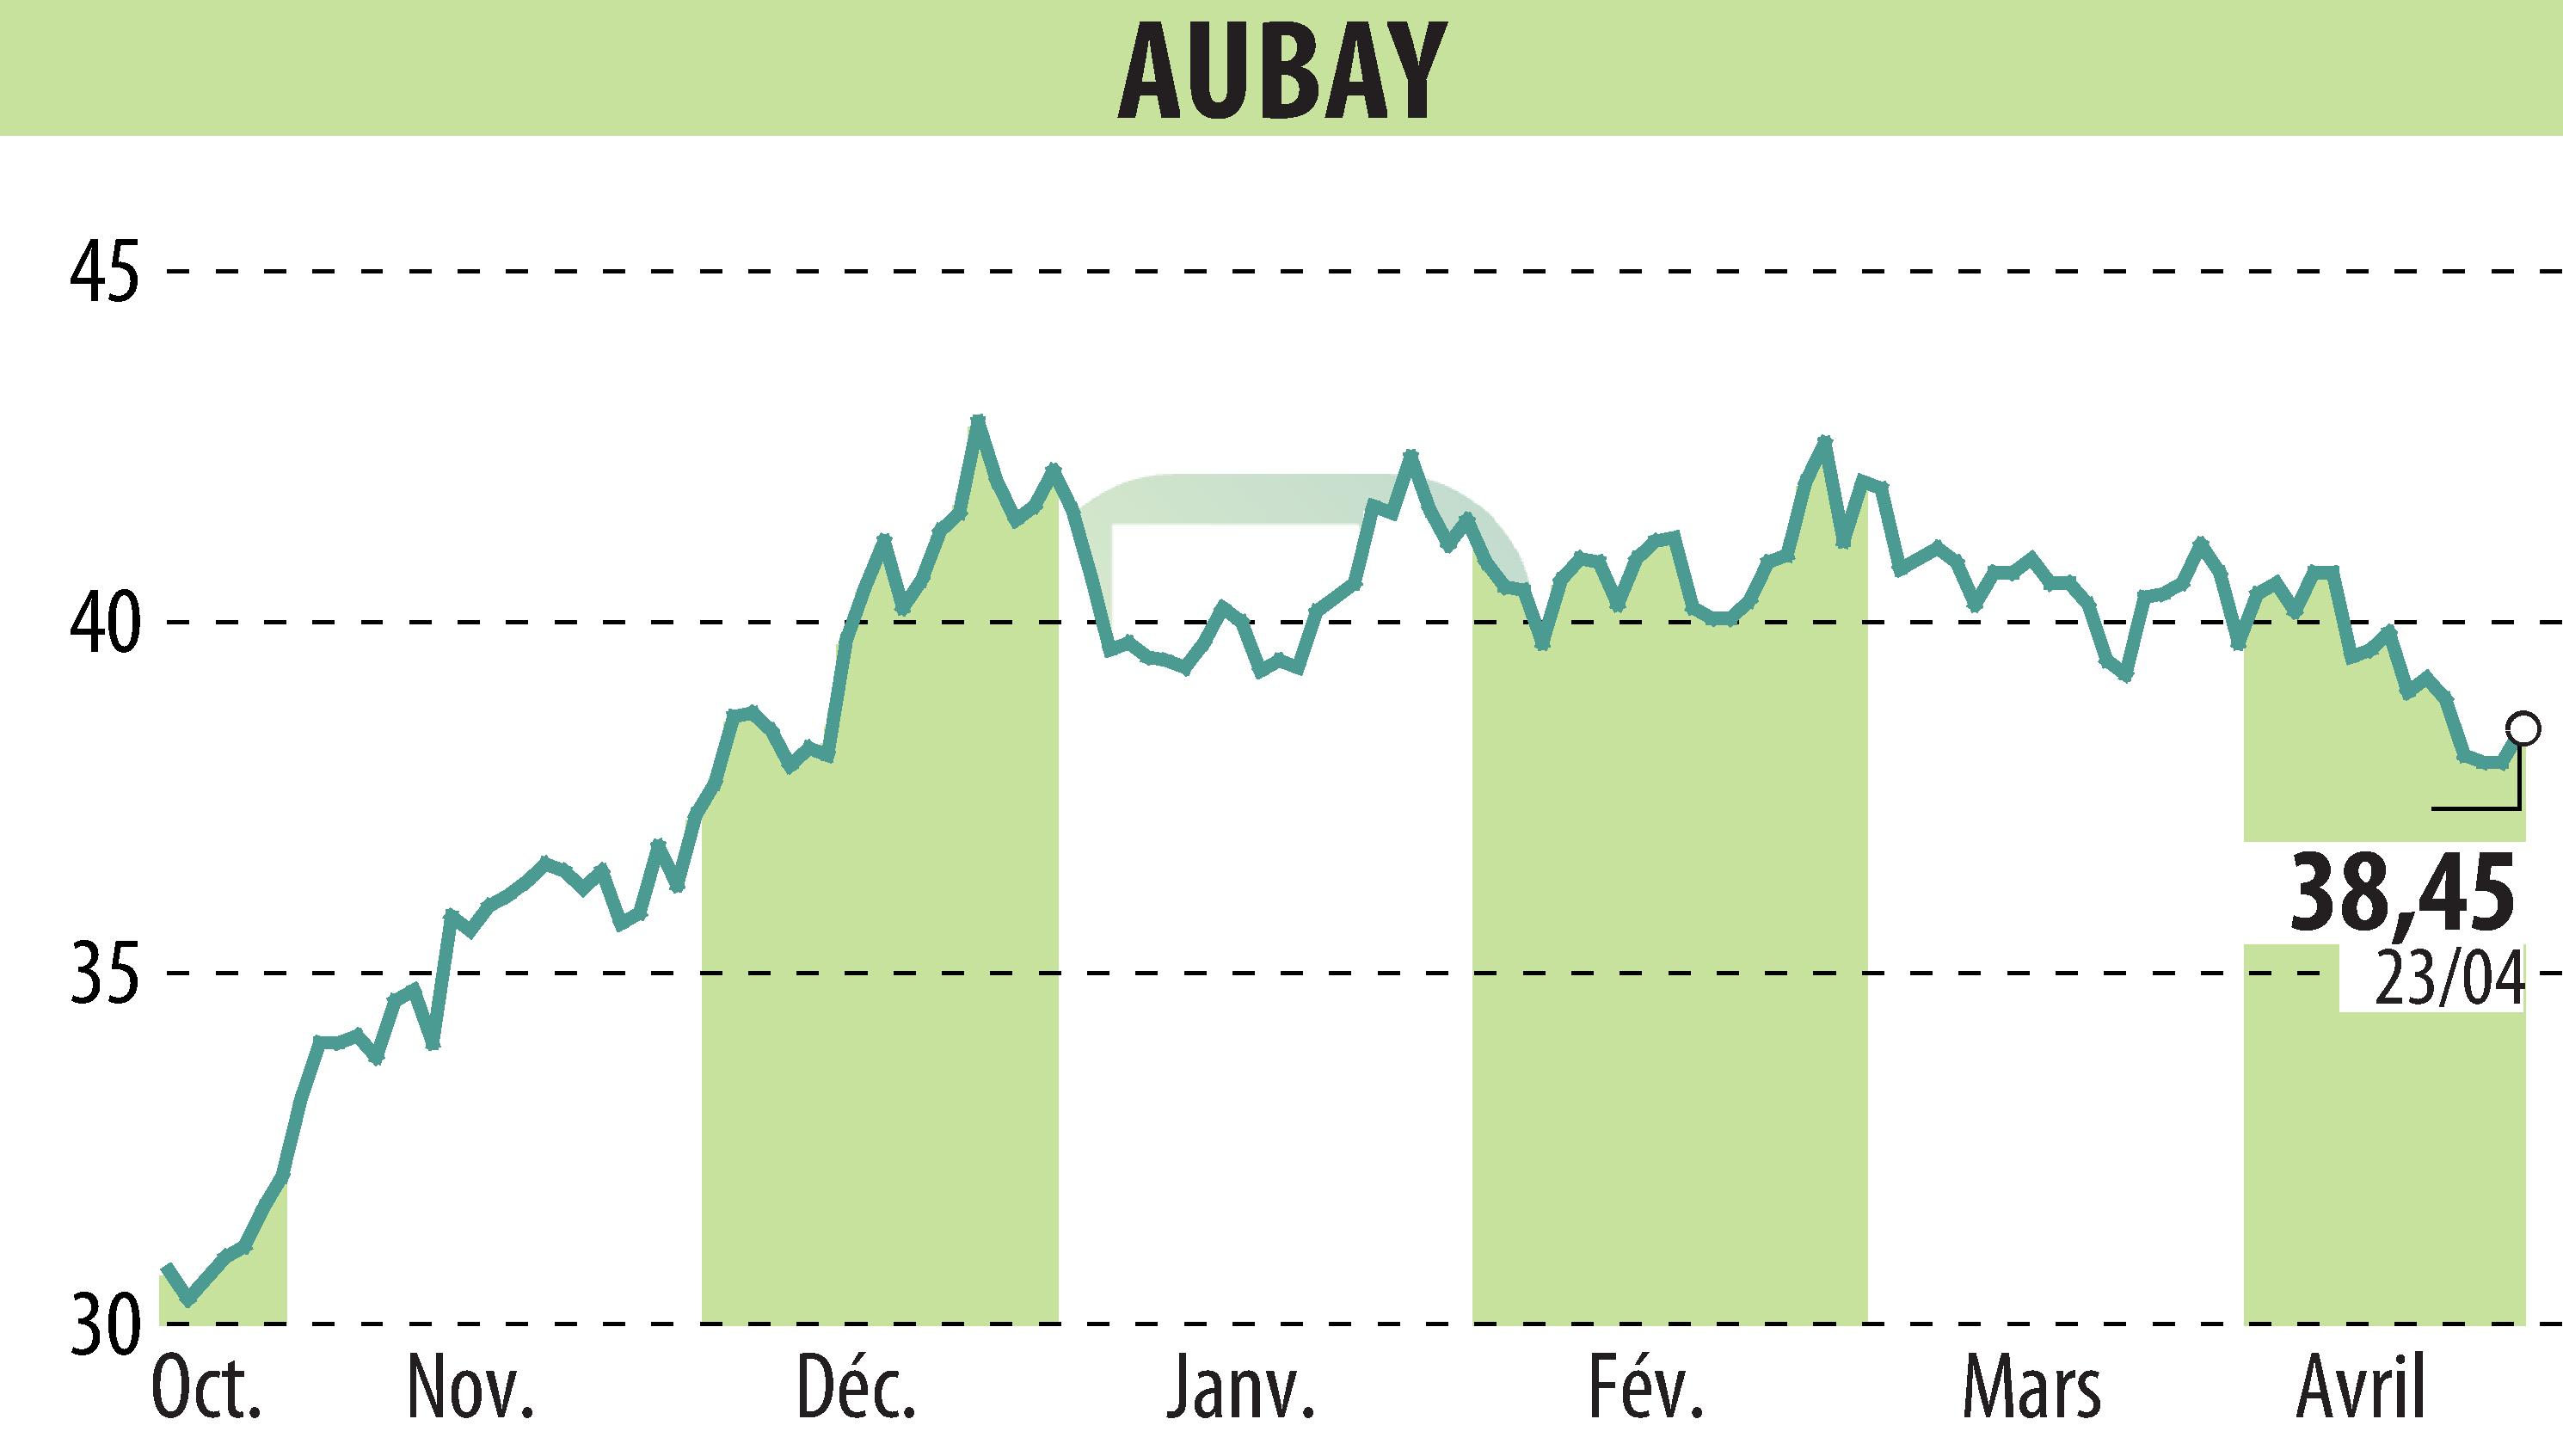 Stock price chart of AUBAY (EPA:AUB) showing fluctuations.